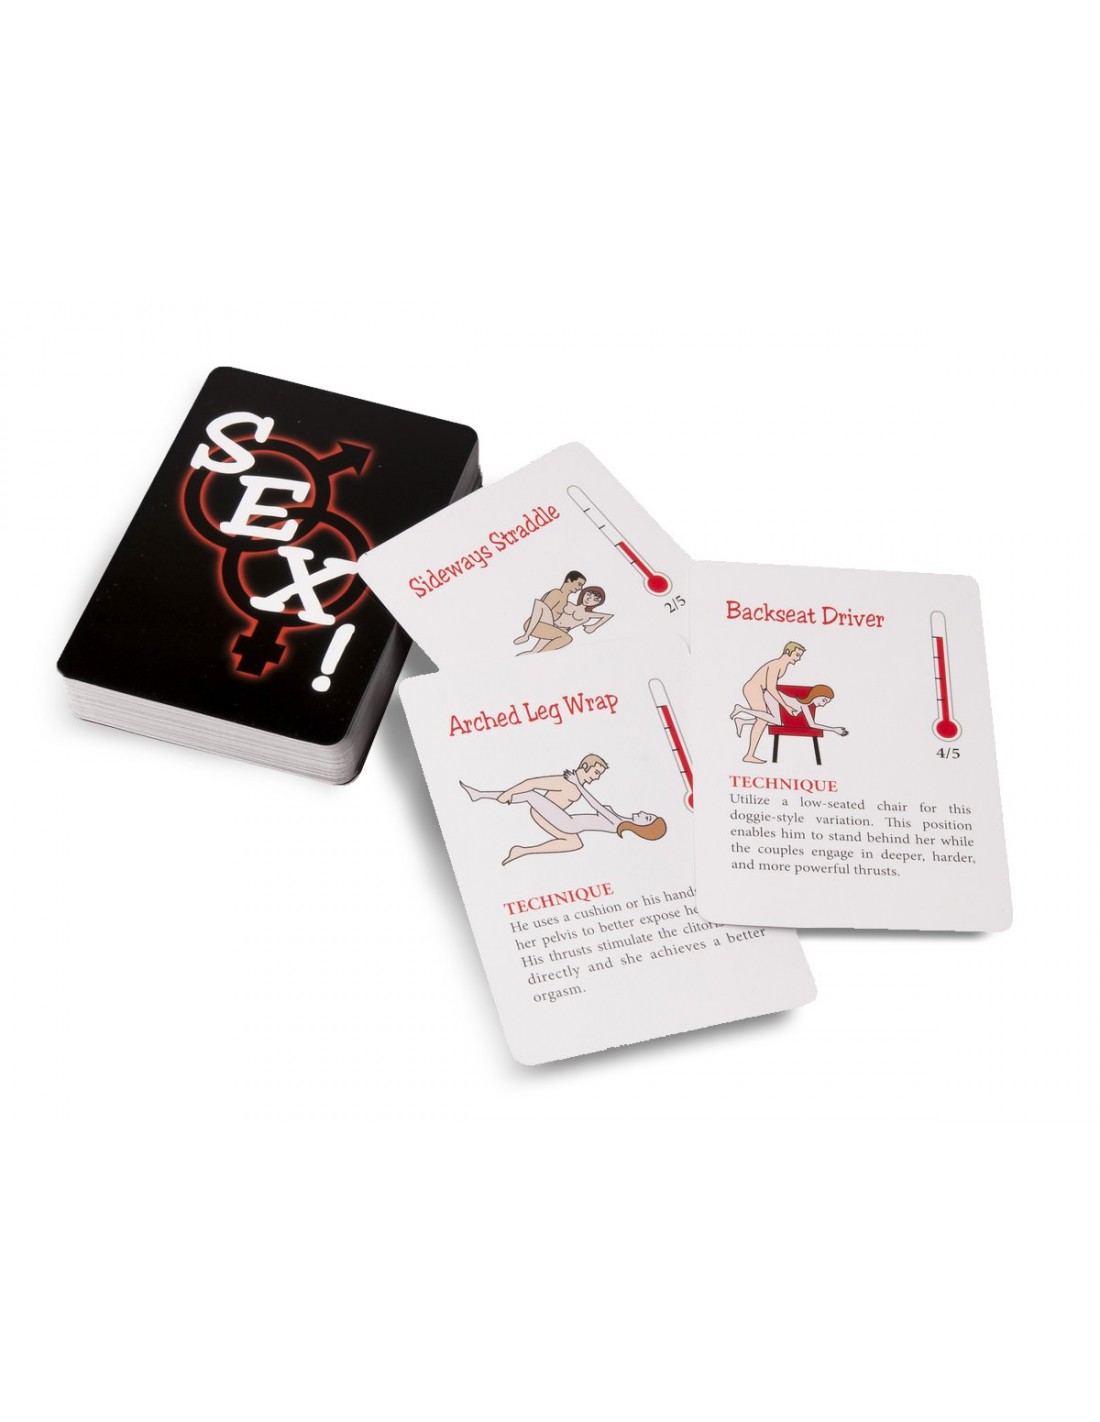 Kheper games A year of sex! Sexual position cards